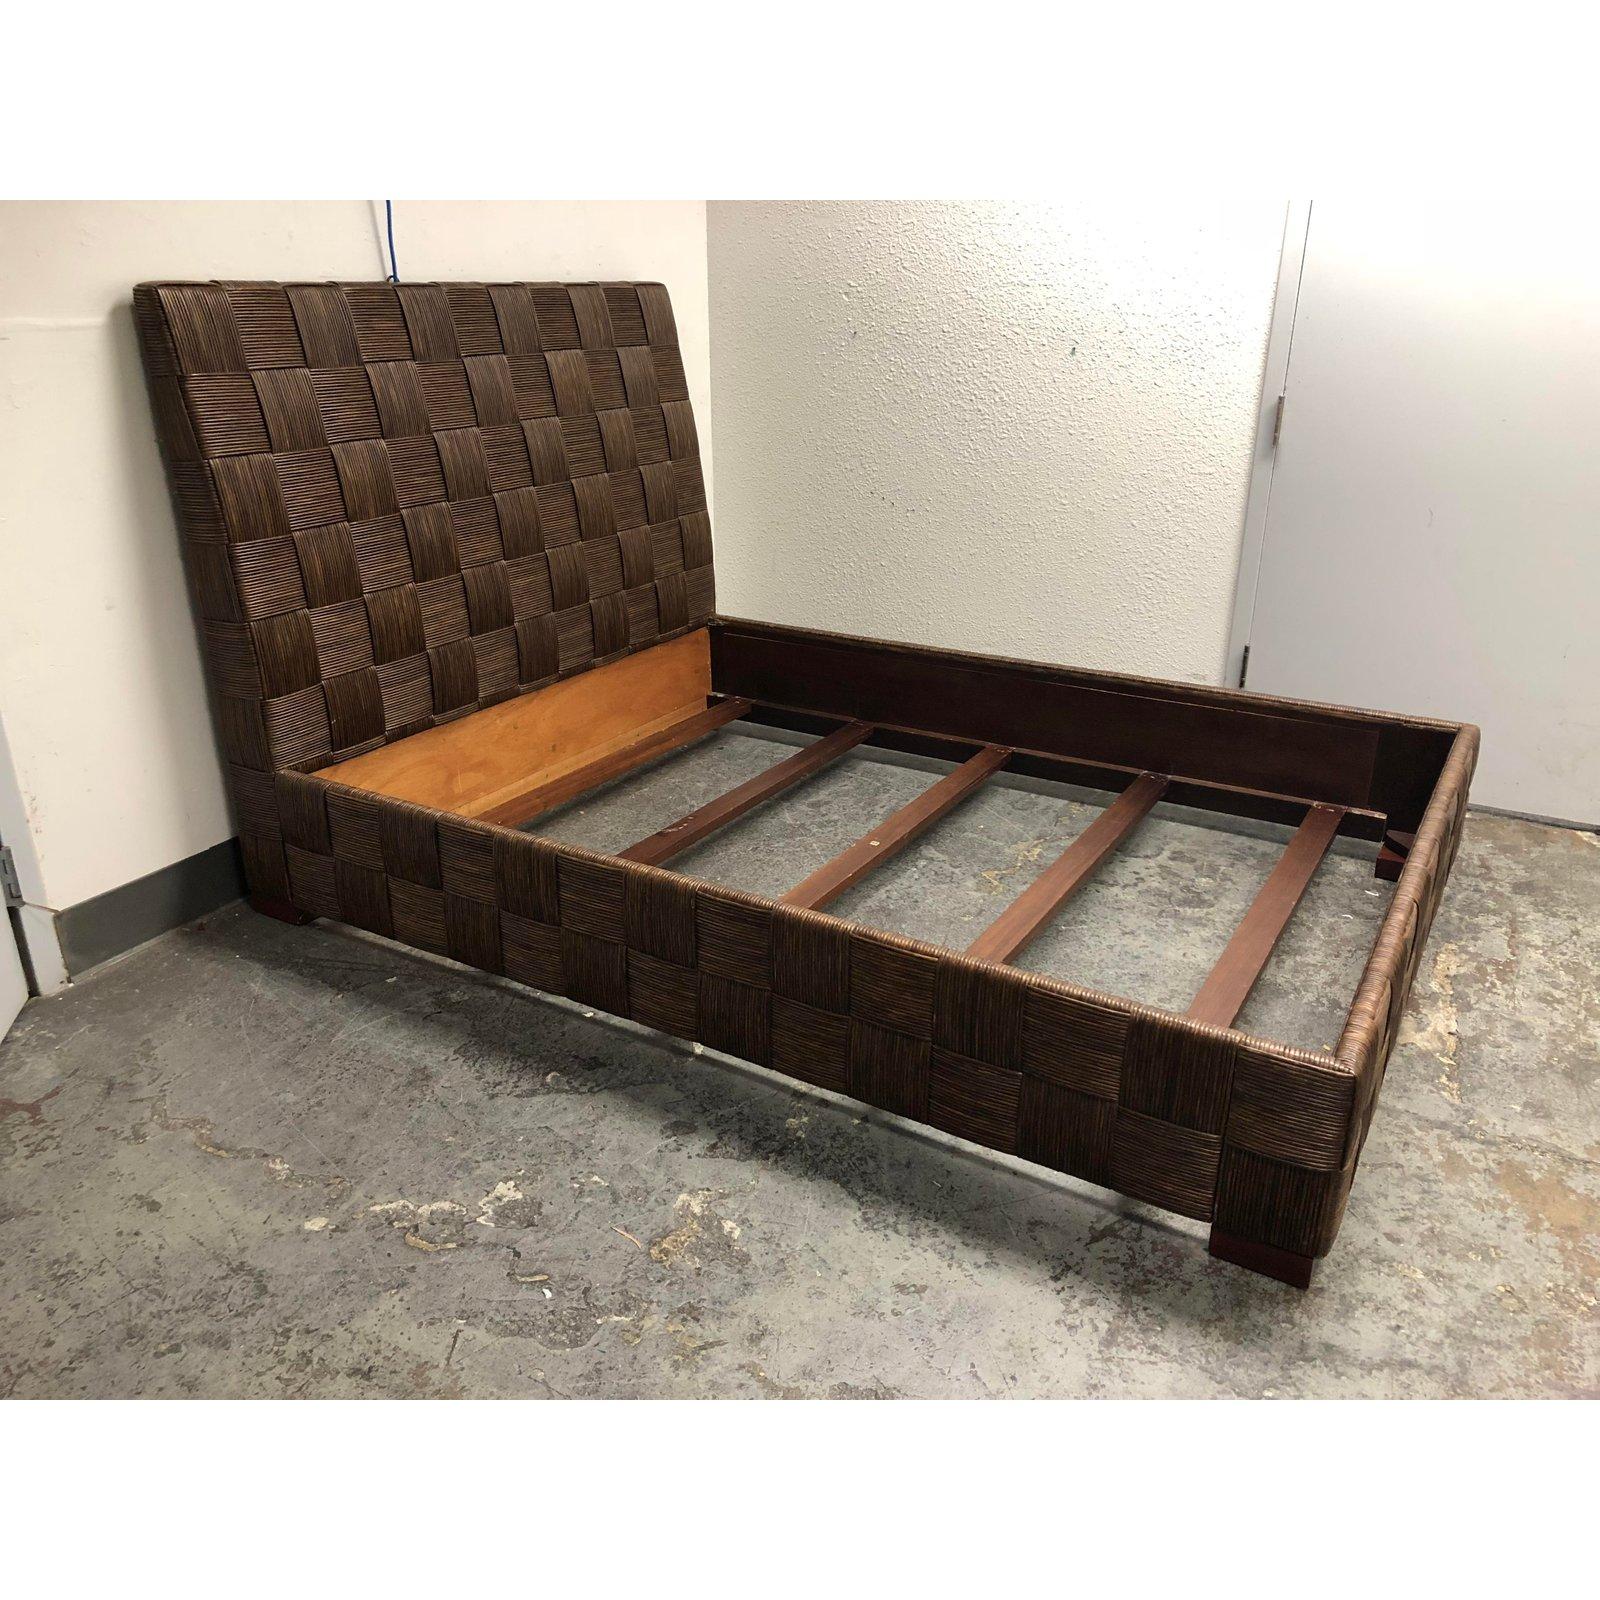 A queen-size bed frame by Donghia. From the Block Island collection designed by John Hutton in 1995. Hutton was the firm design director from 1978-1998. A stout mahogany frame construction veneered in block patterned rush style wicker. The stain is